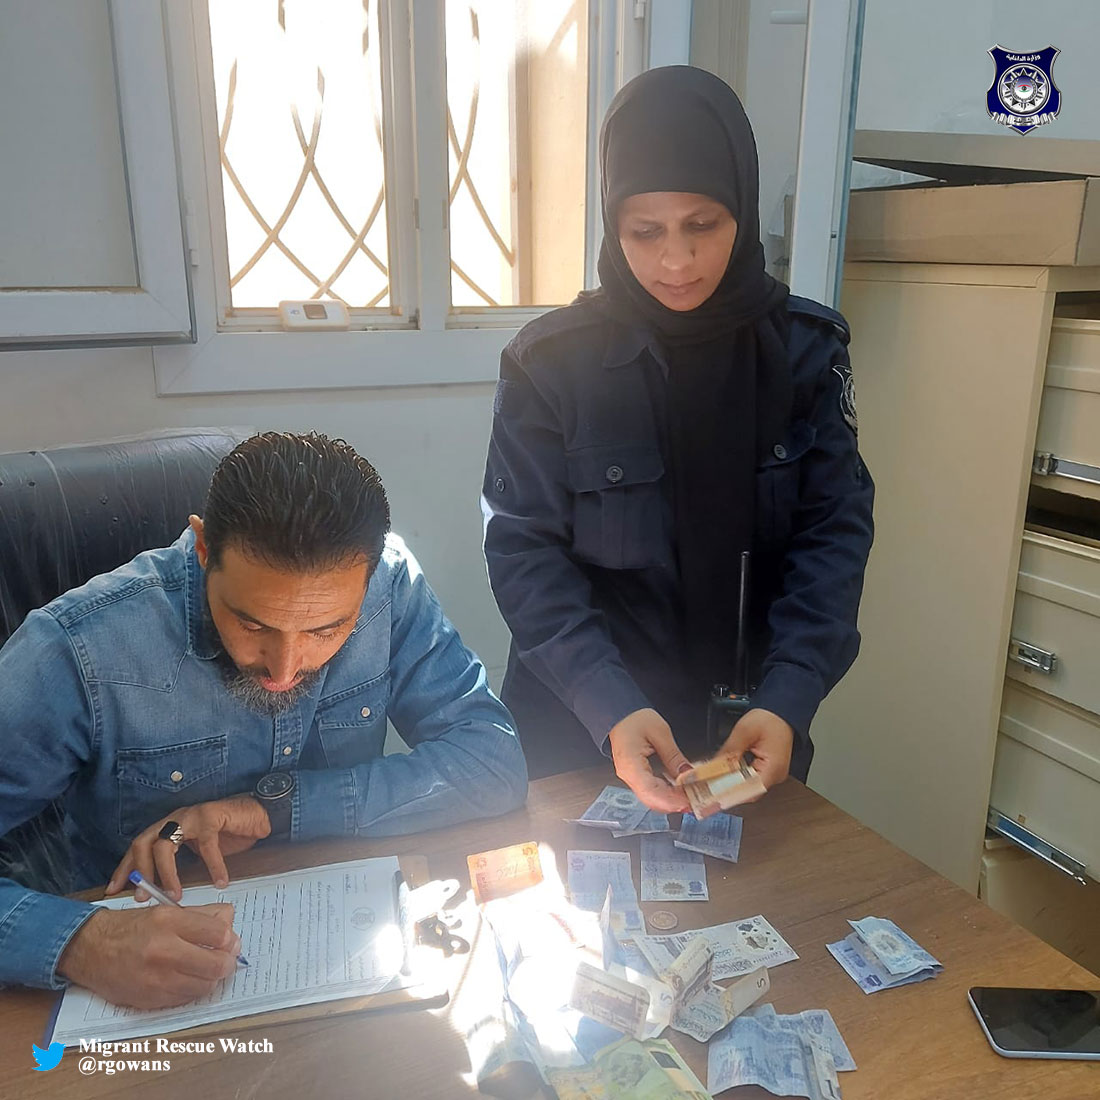 #Libya 25.04.24 - Tripoli Police in continuation of campaign against panhandling in public areas apprehended 2 #migrant females with children of Arab nationalities. The individuals were transferred to Tripoli Security Directorate for legal action. #migrantcrisis #Frontex